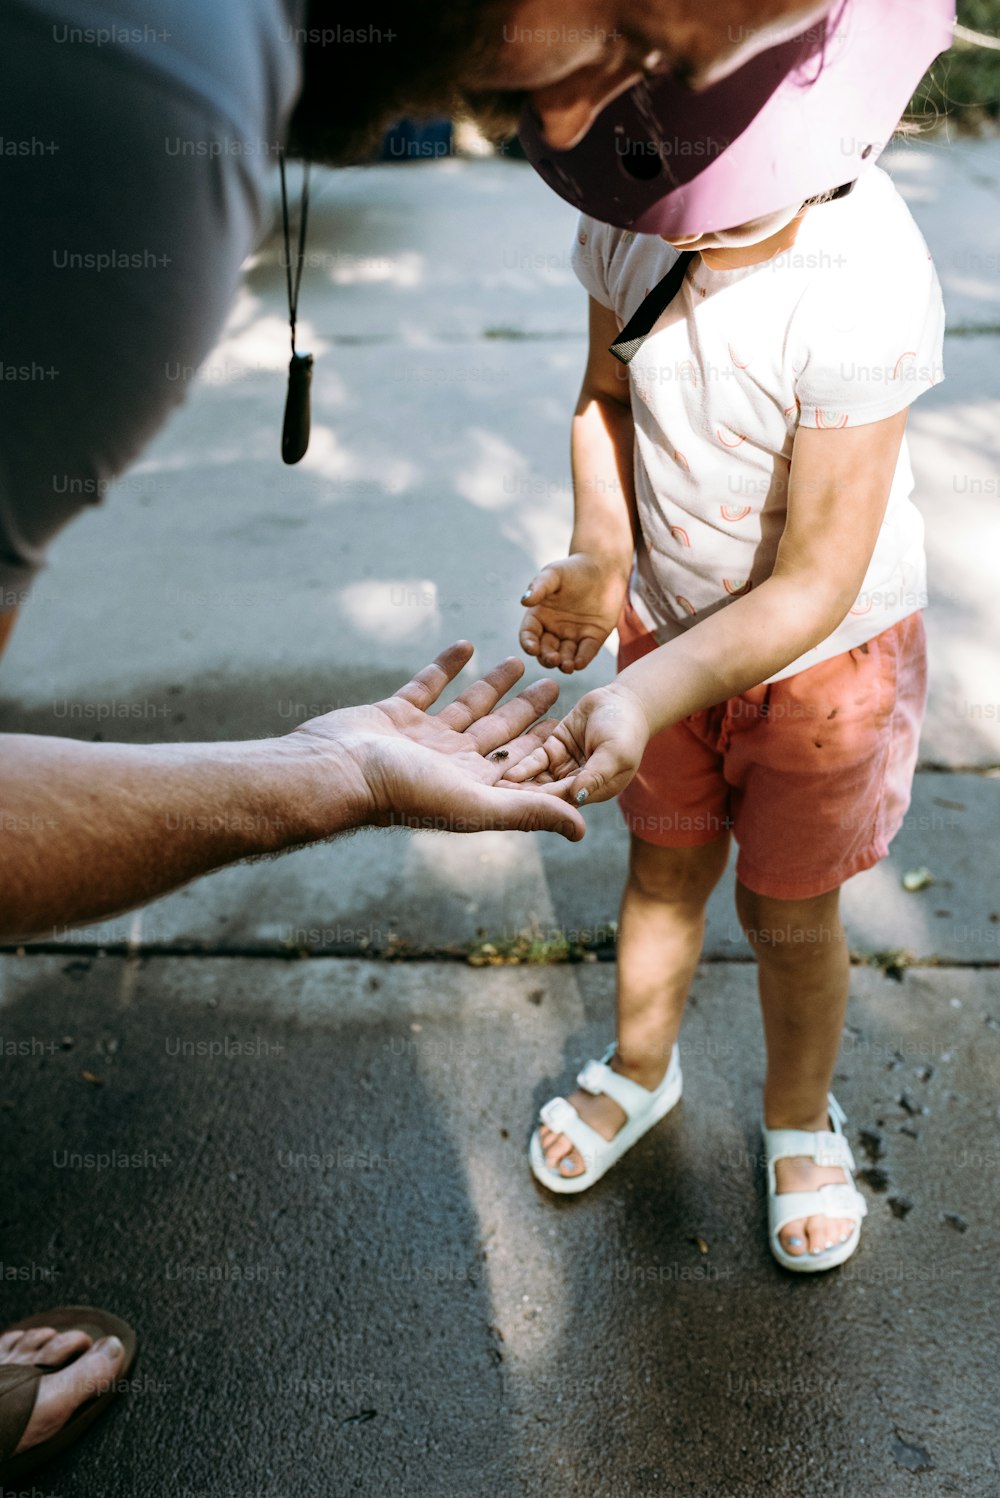 a small child reaching out to a man's hand